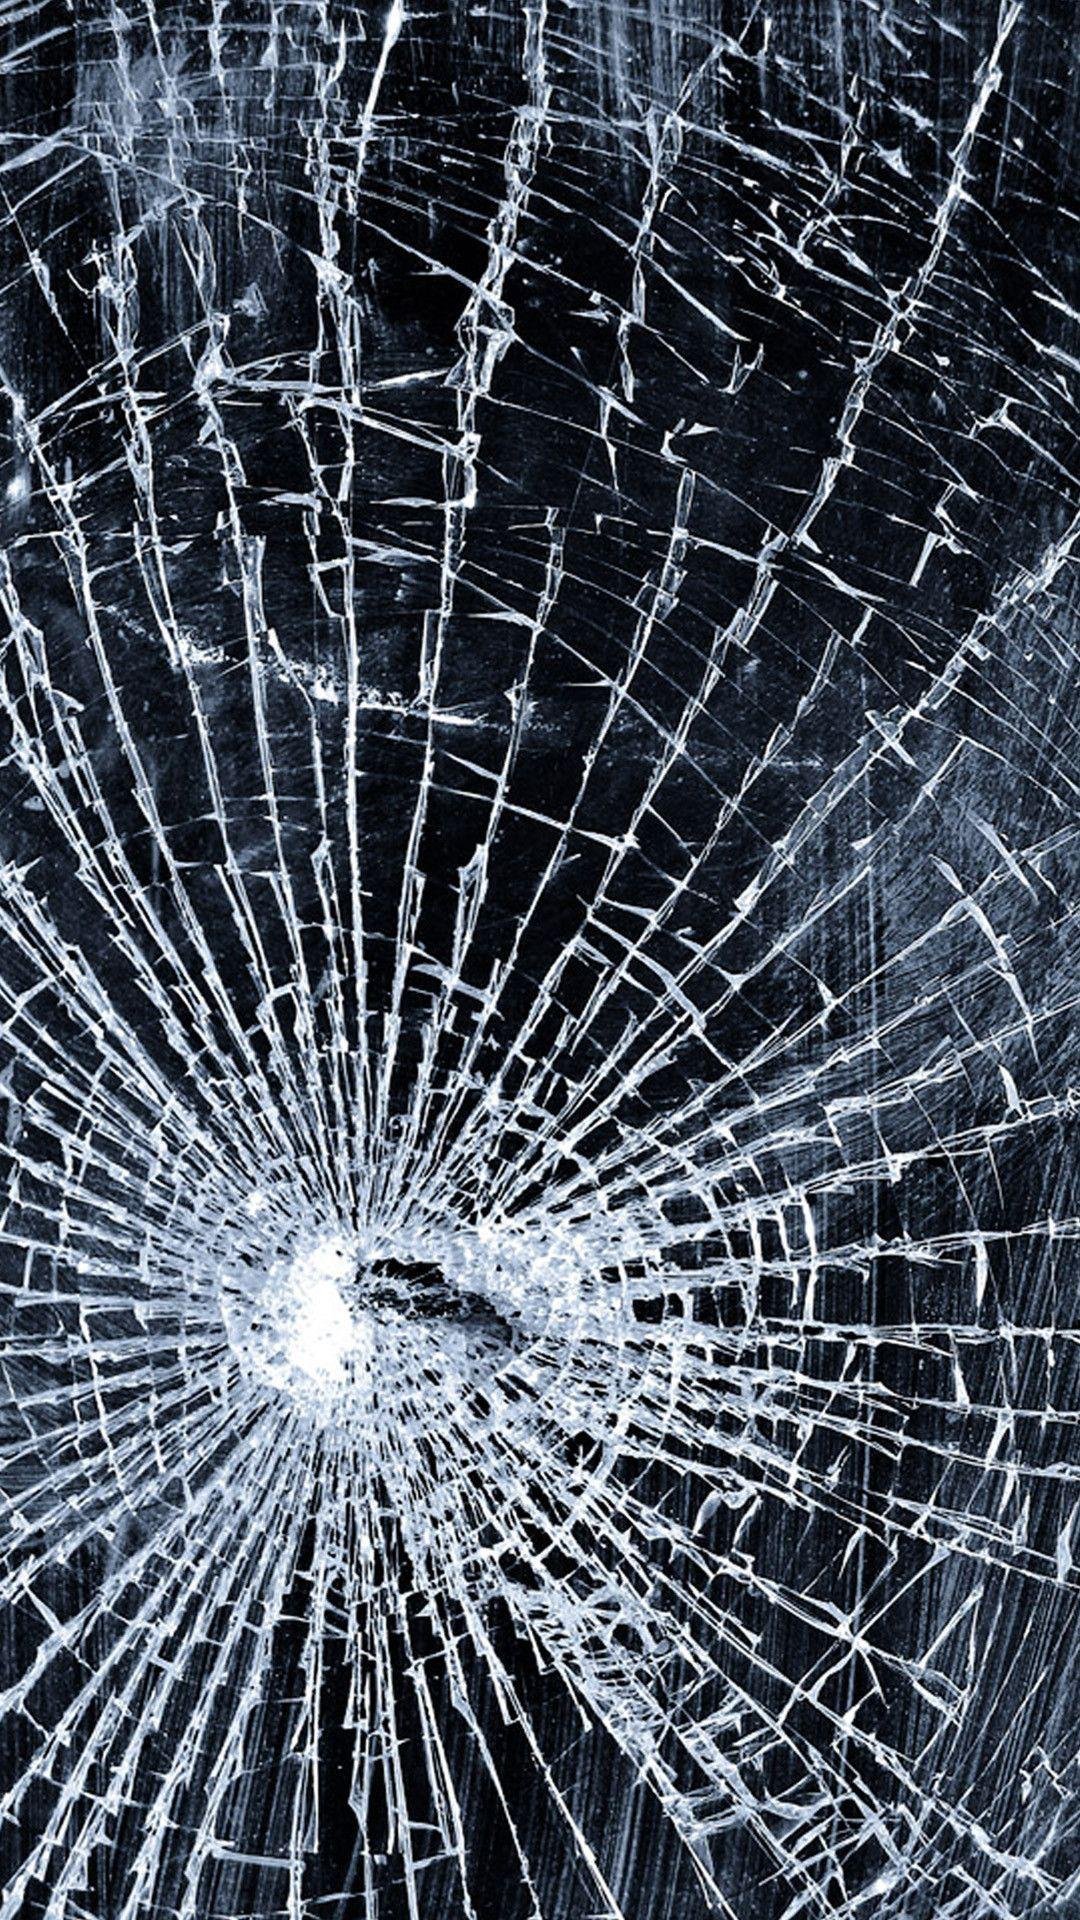 cracked glass wallpaper iphone